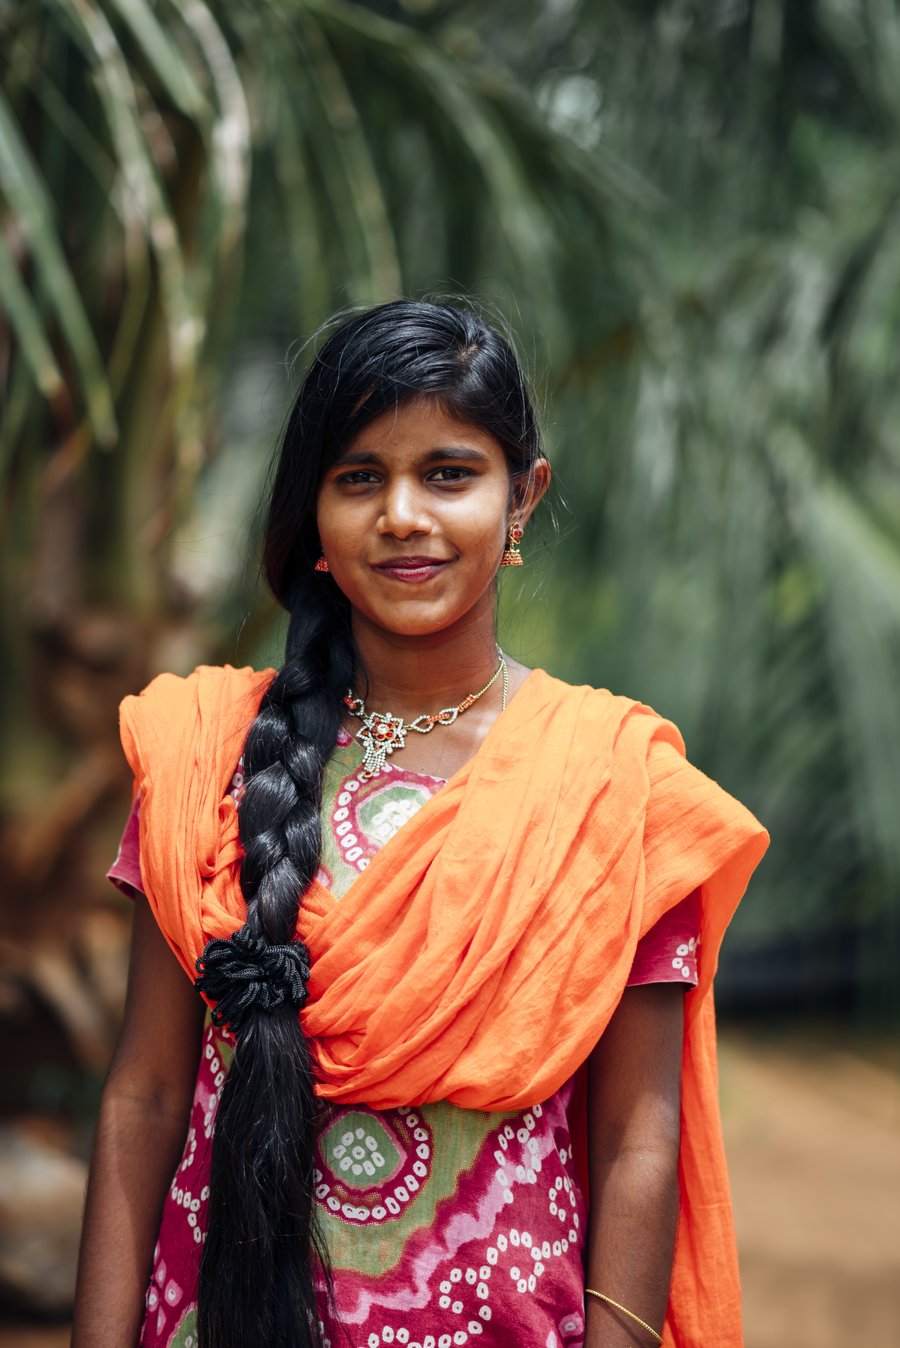 A young woman in an orange sari looks at the camera